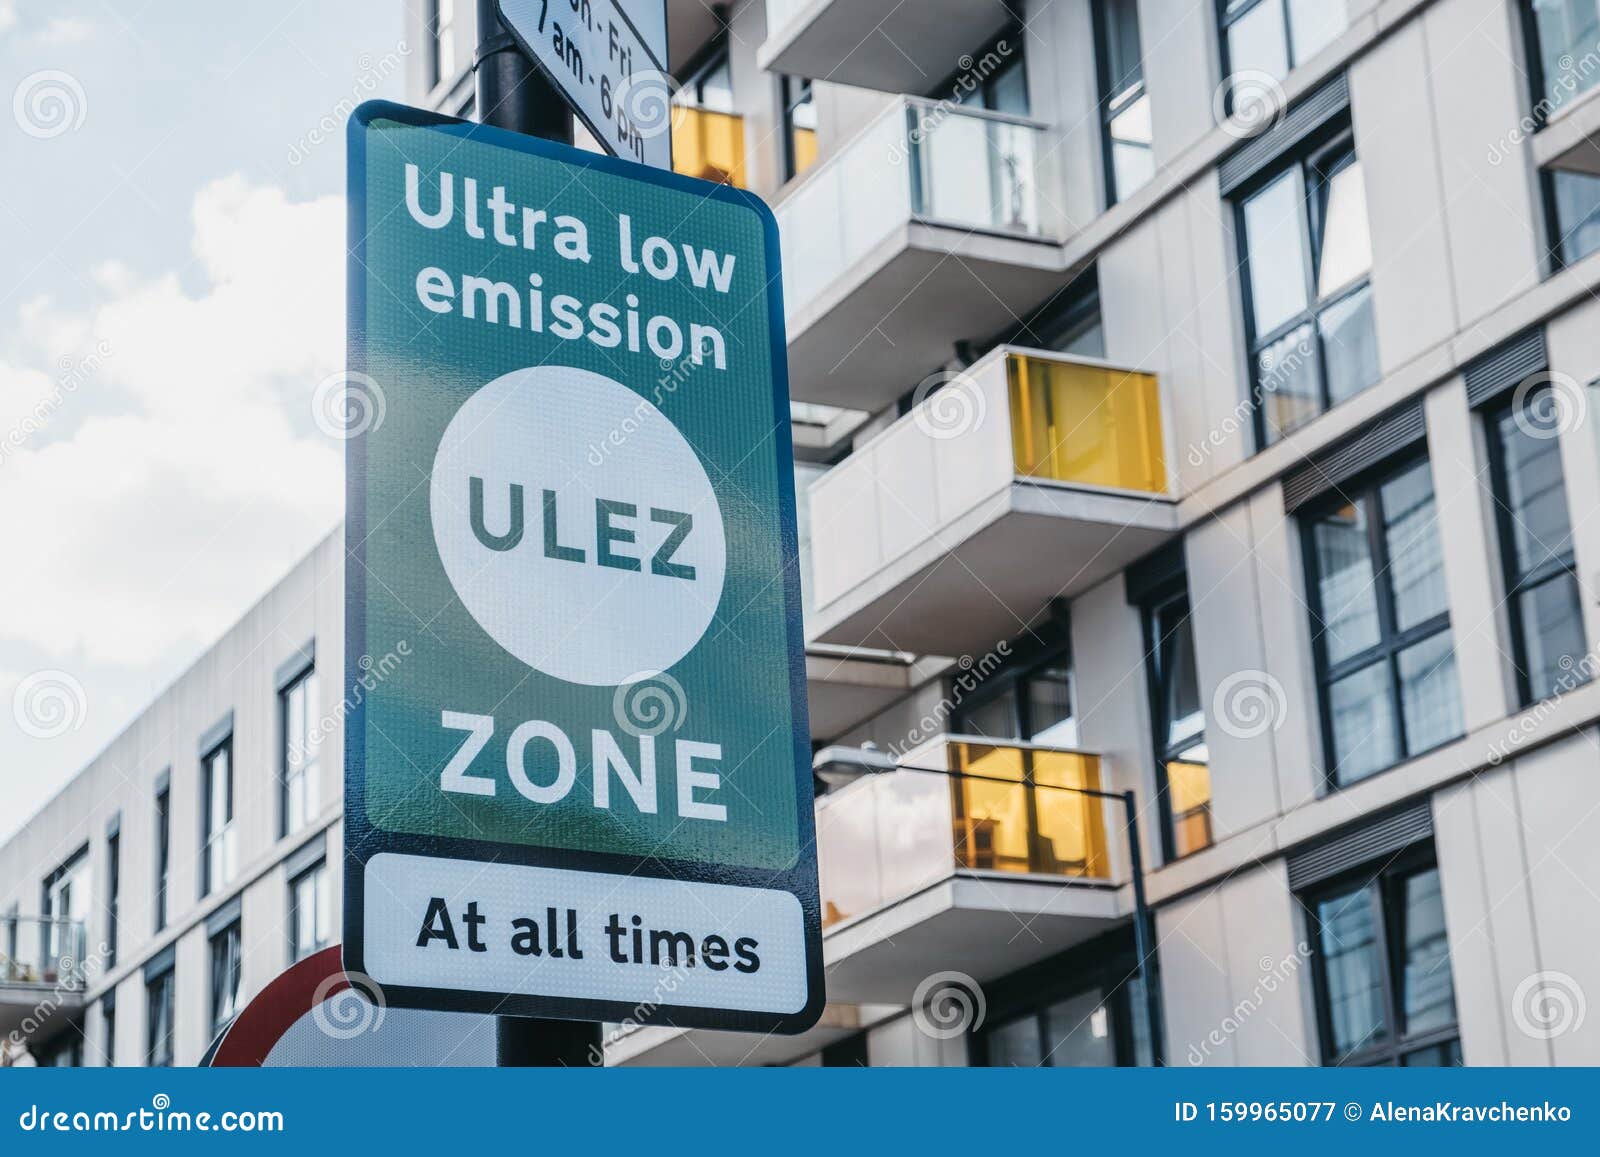 ultra low emission zone ulez sign on a street in london, uk